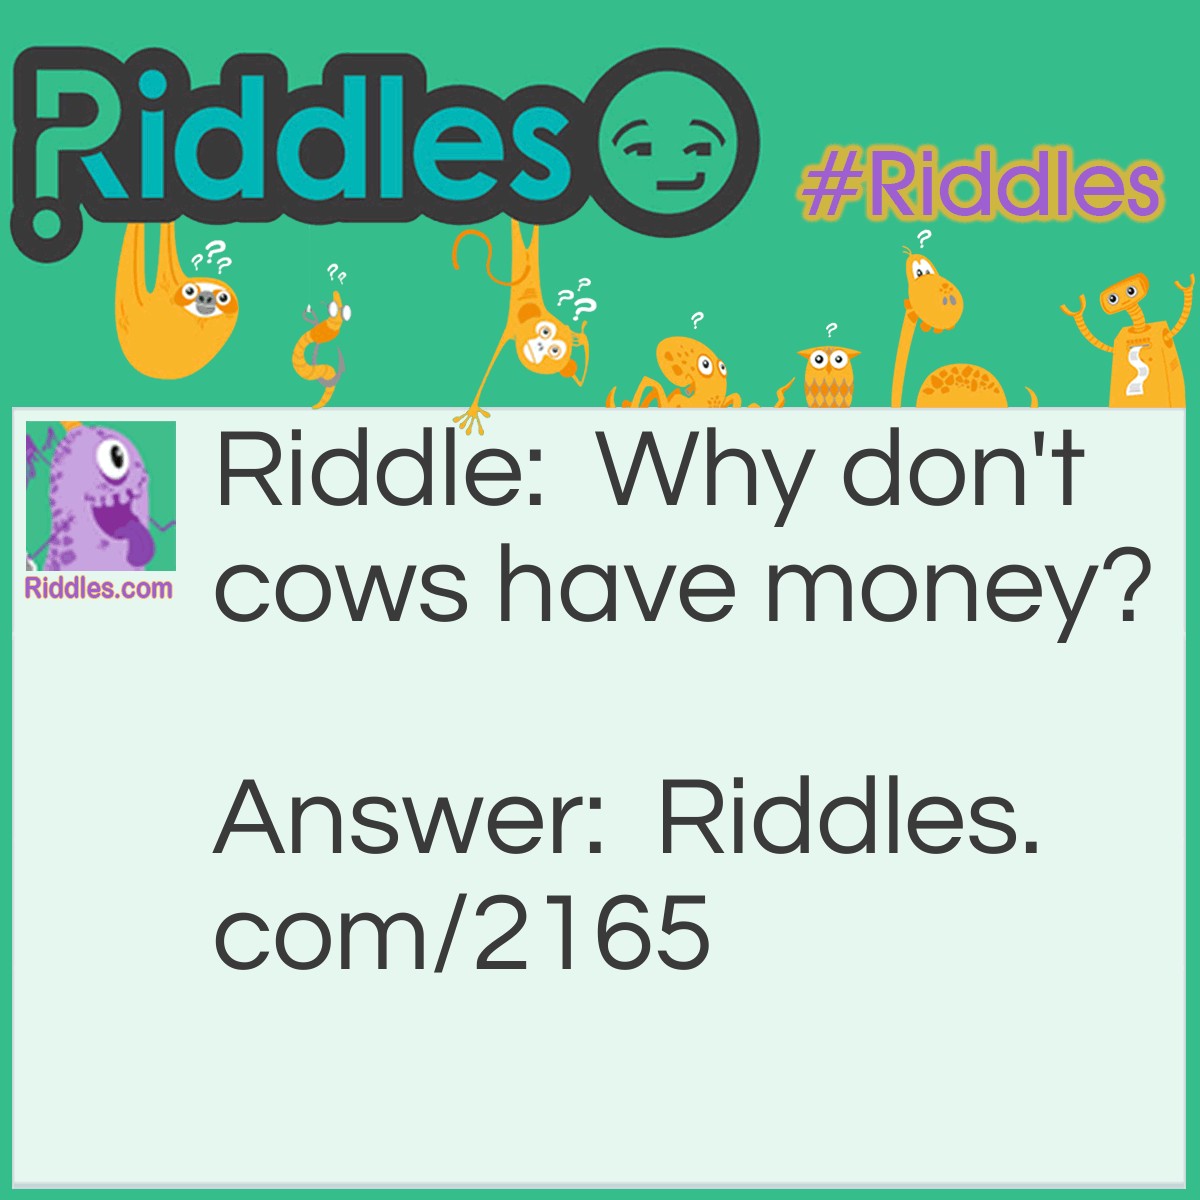 Riddle: Why don't cows have money? Answer: Because the farmer milks them dry.